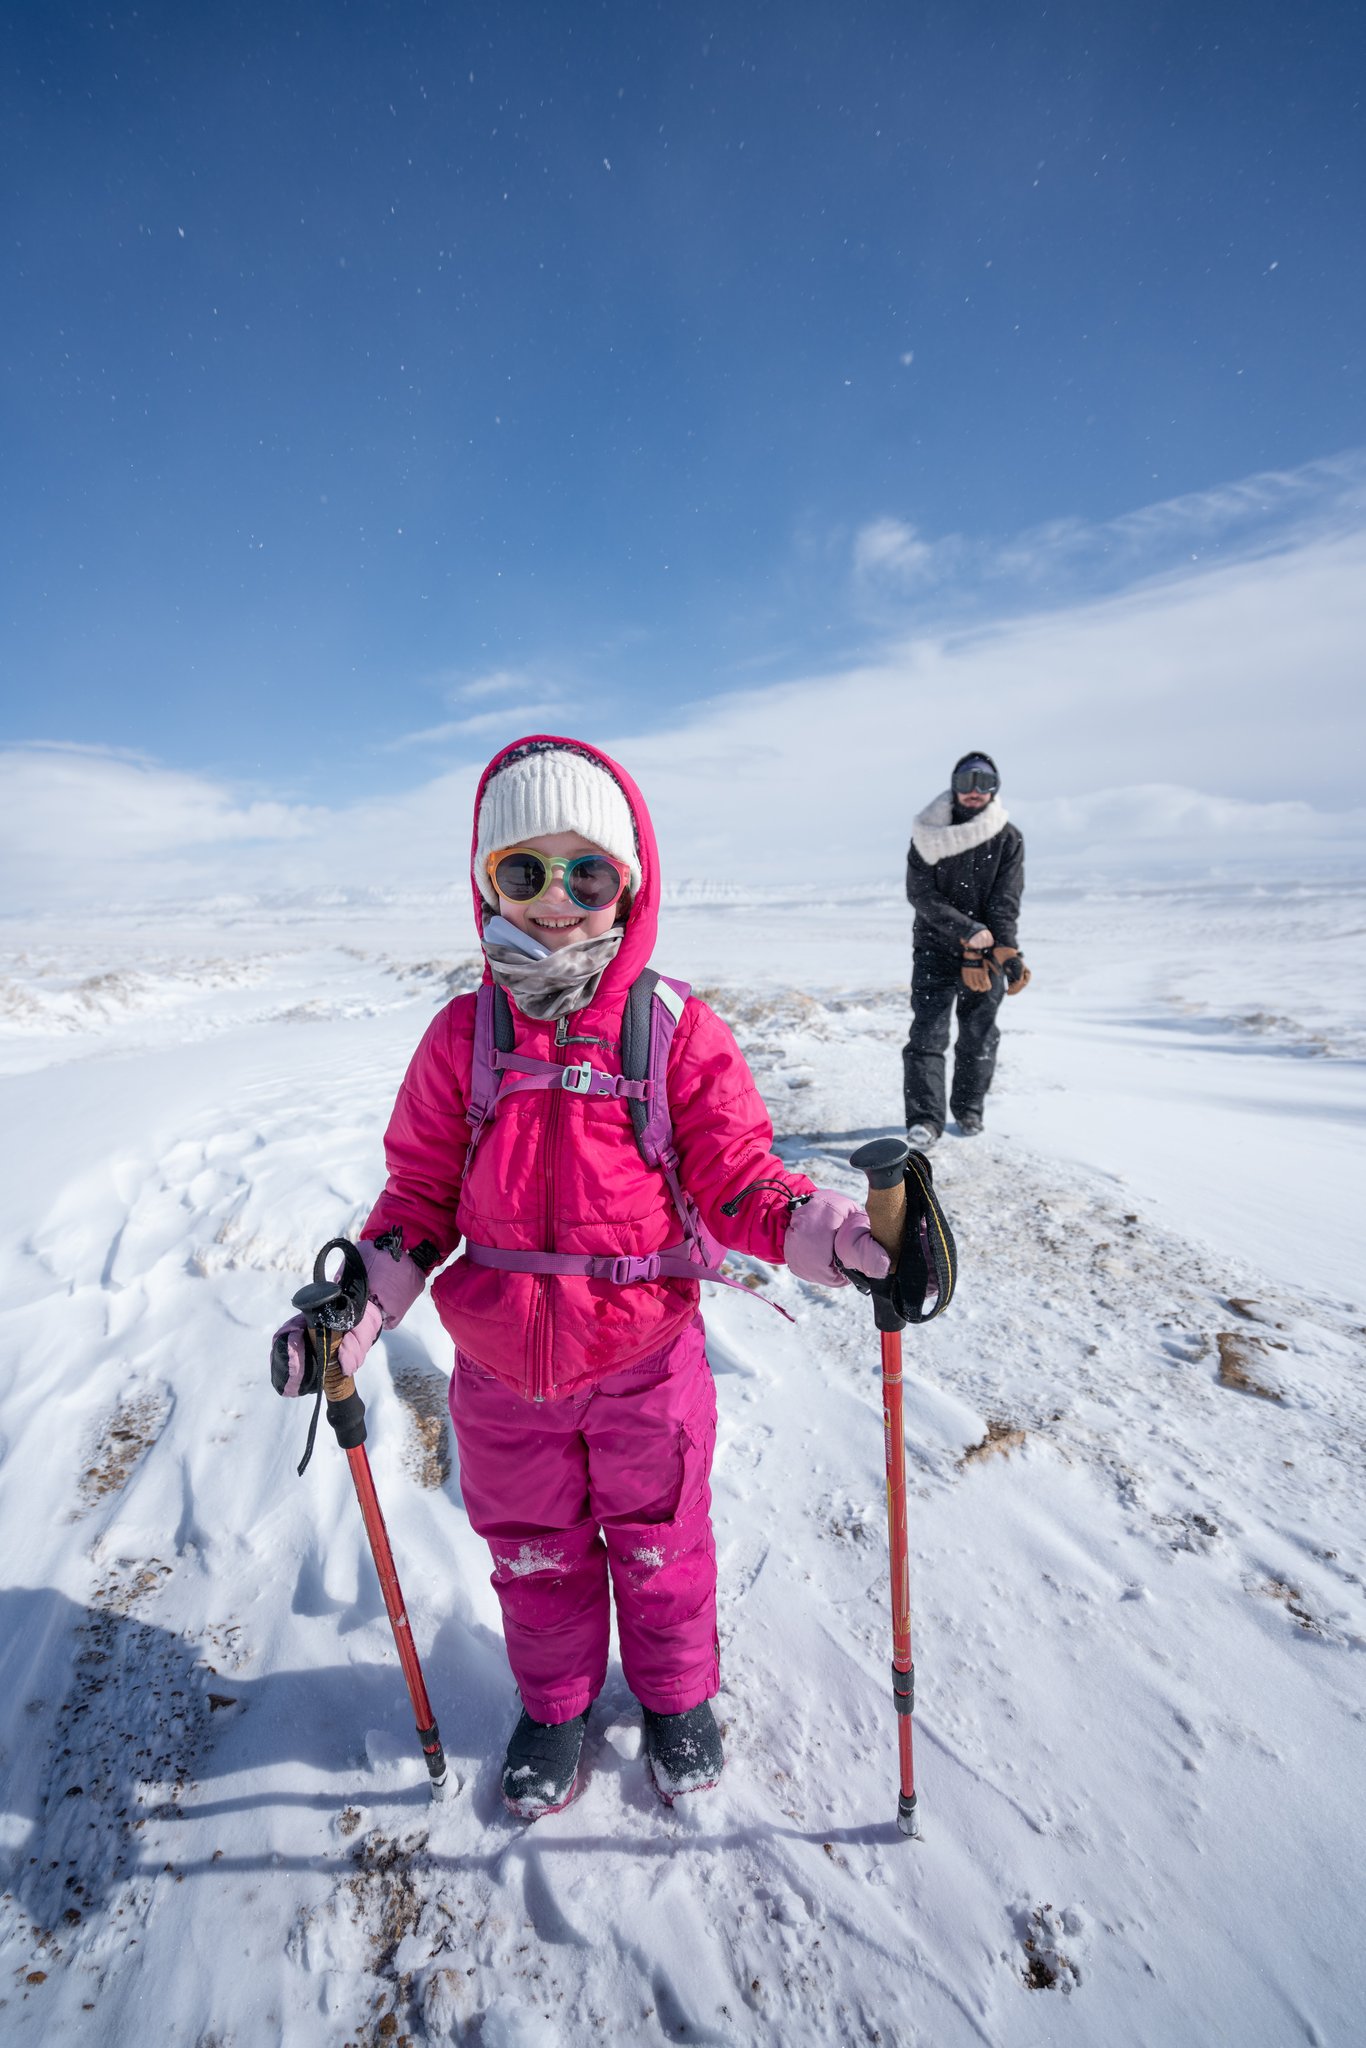 eufilmfest on X: Brave Girl: The Future of Wyoming by Mark Pedri @BtpFilm  Brave Girl is a strong young adventurer who is just beginning her journey  of finding out what it takes